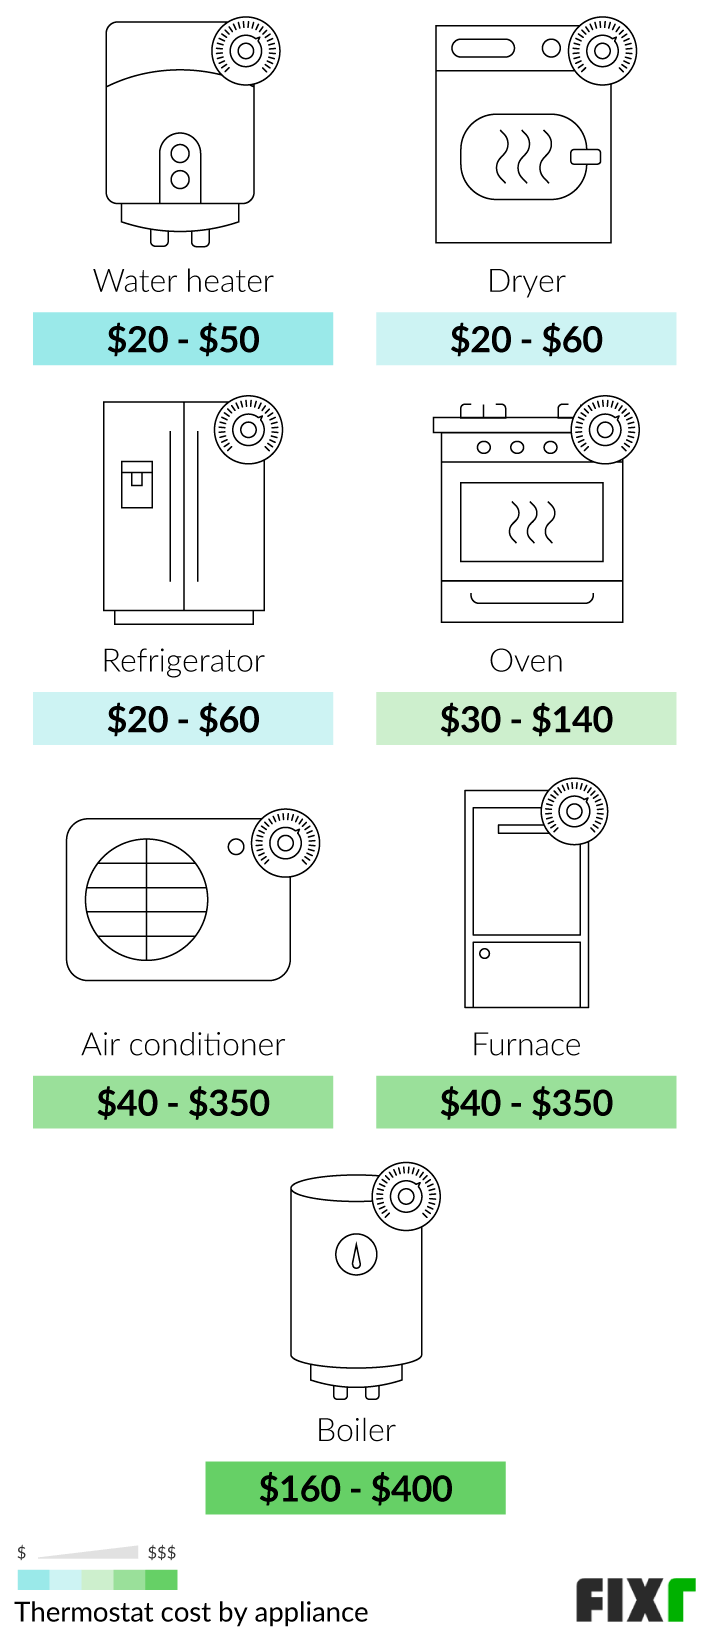 Cost of a Water Heater, Dryer, Refrigerator, Oven, AC, Furnace, or Boiler Thermostat